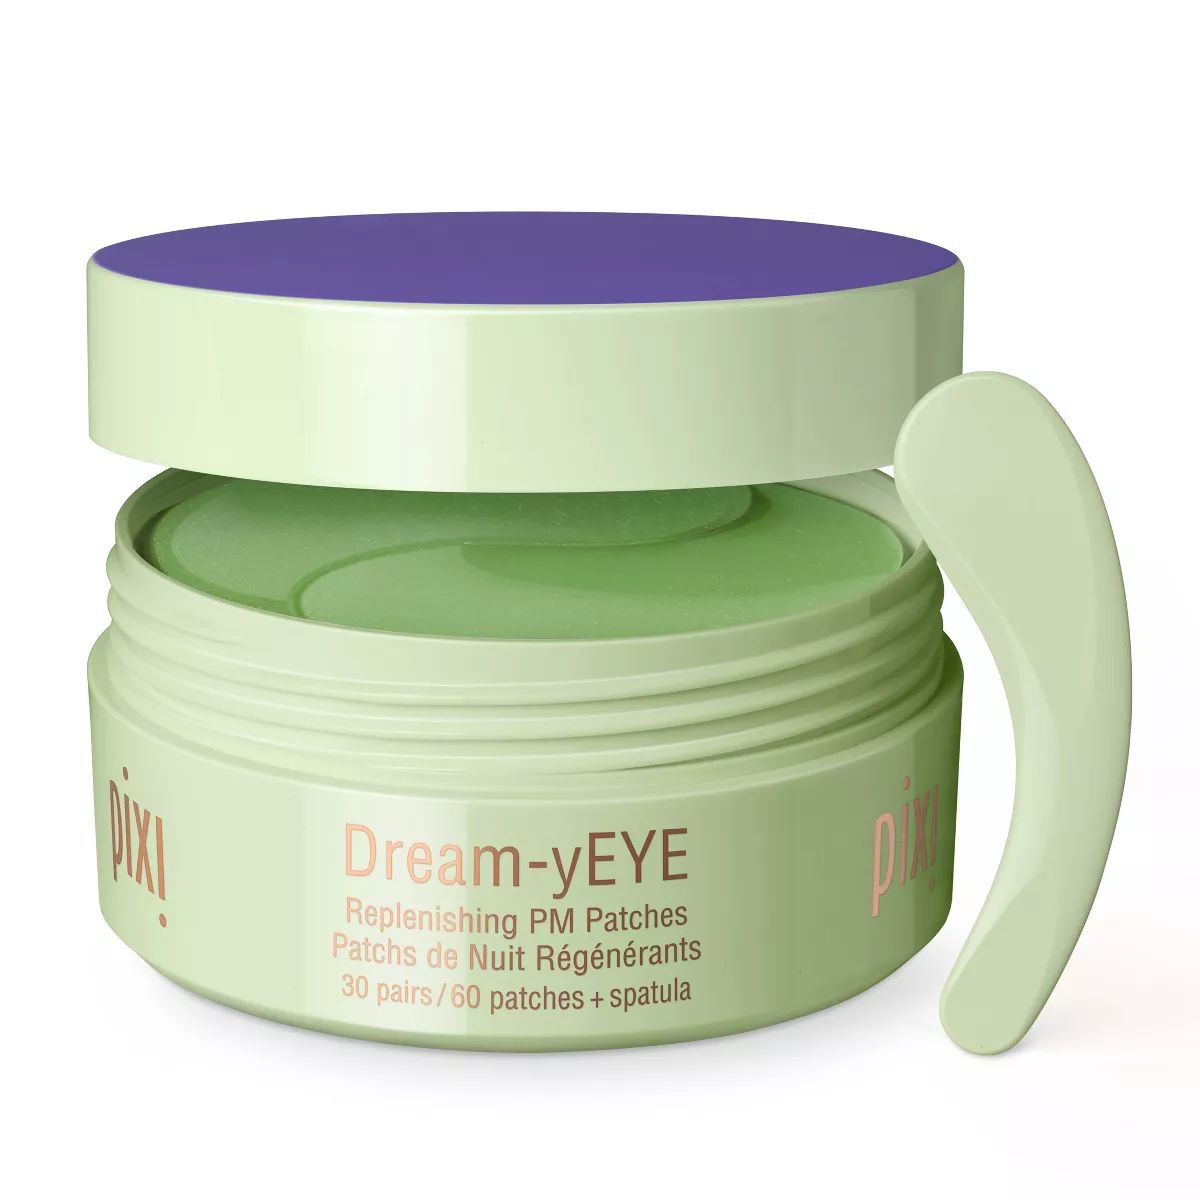 Pixi Dream-yEYE Calming and Replensihing Eye Patches with Jasmine & Vitamin A - 30 pairs/60ct | Target